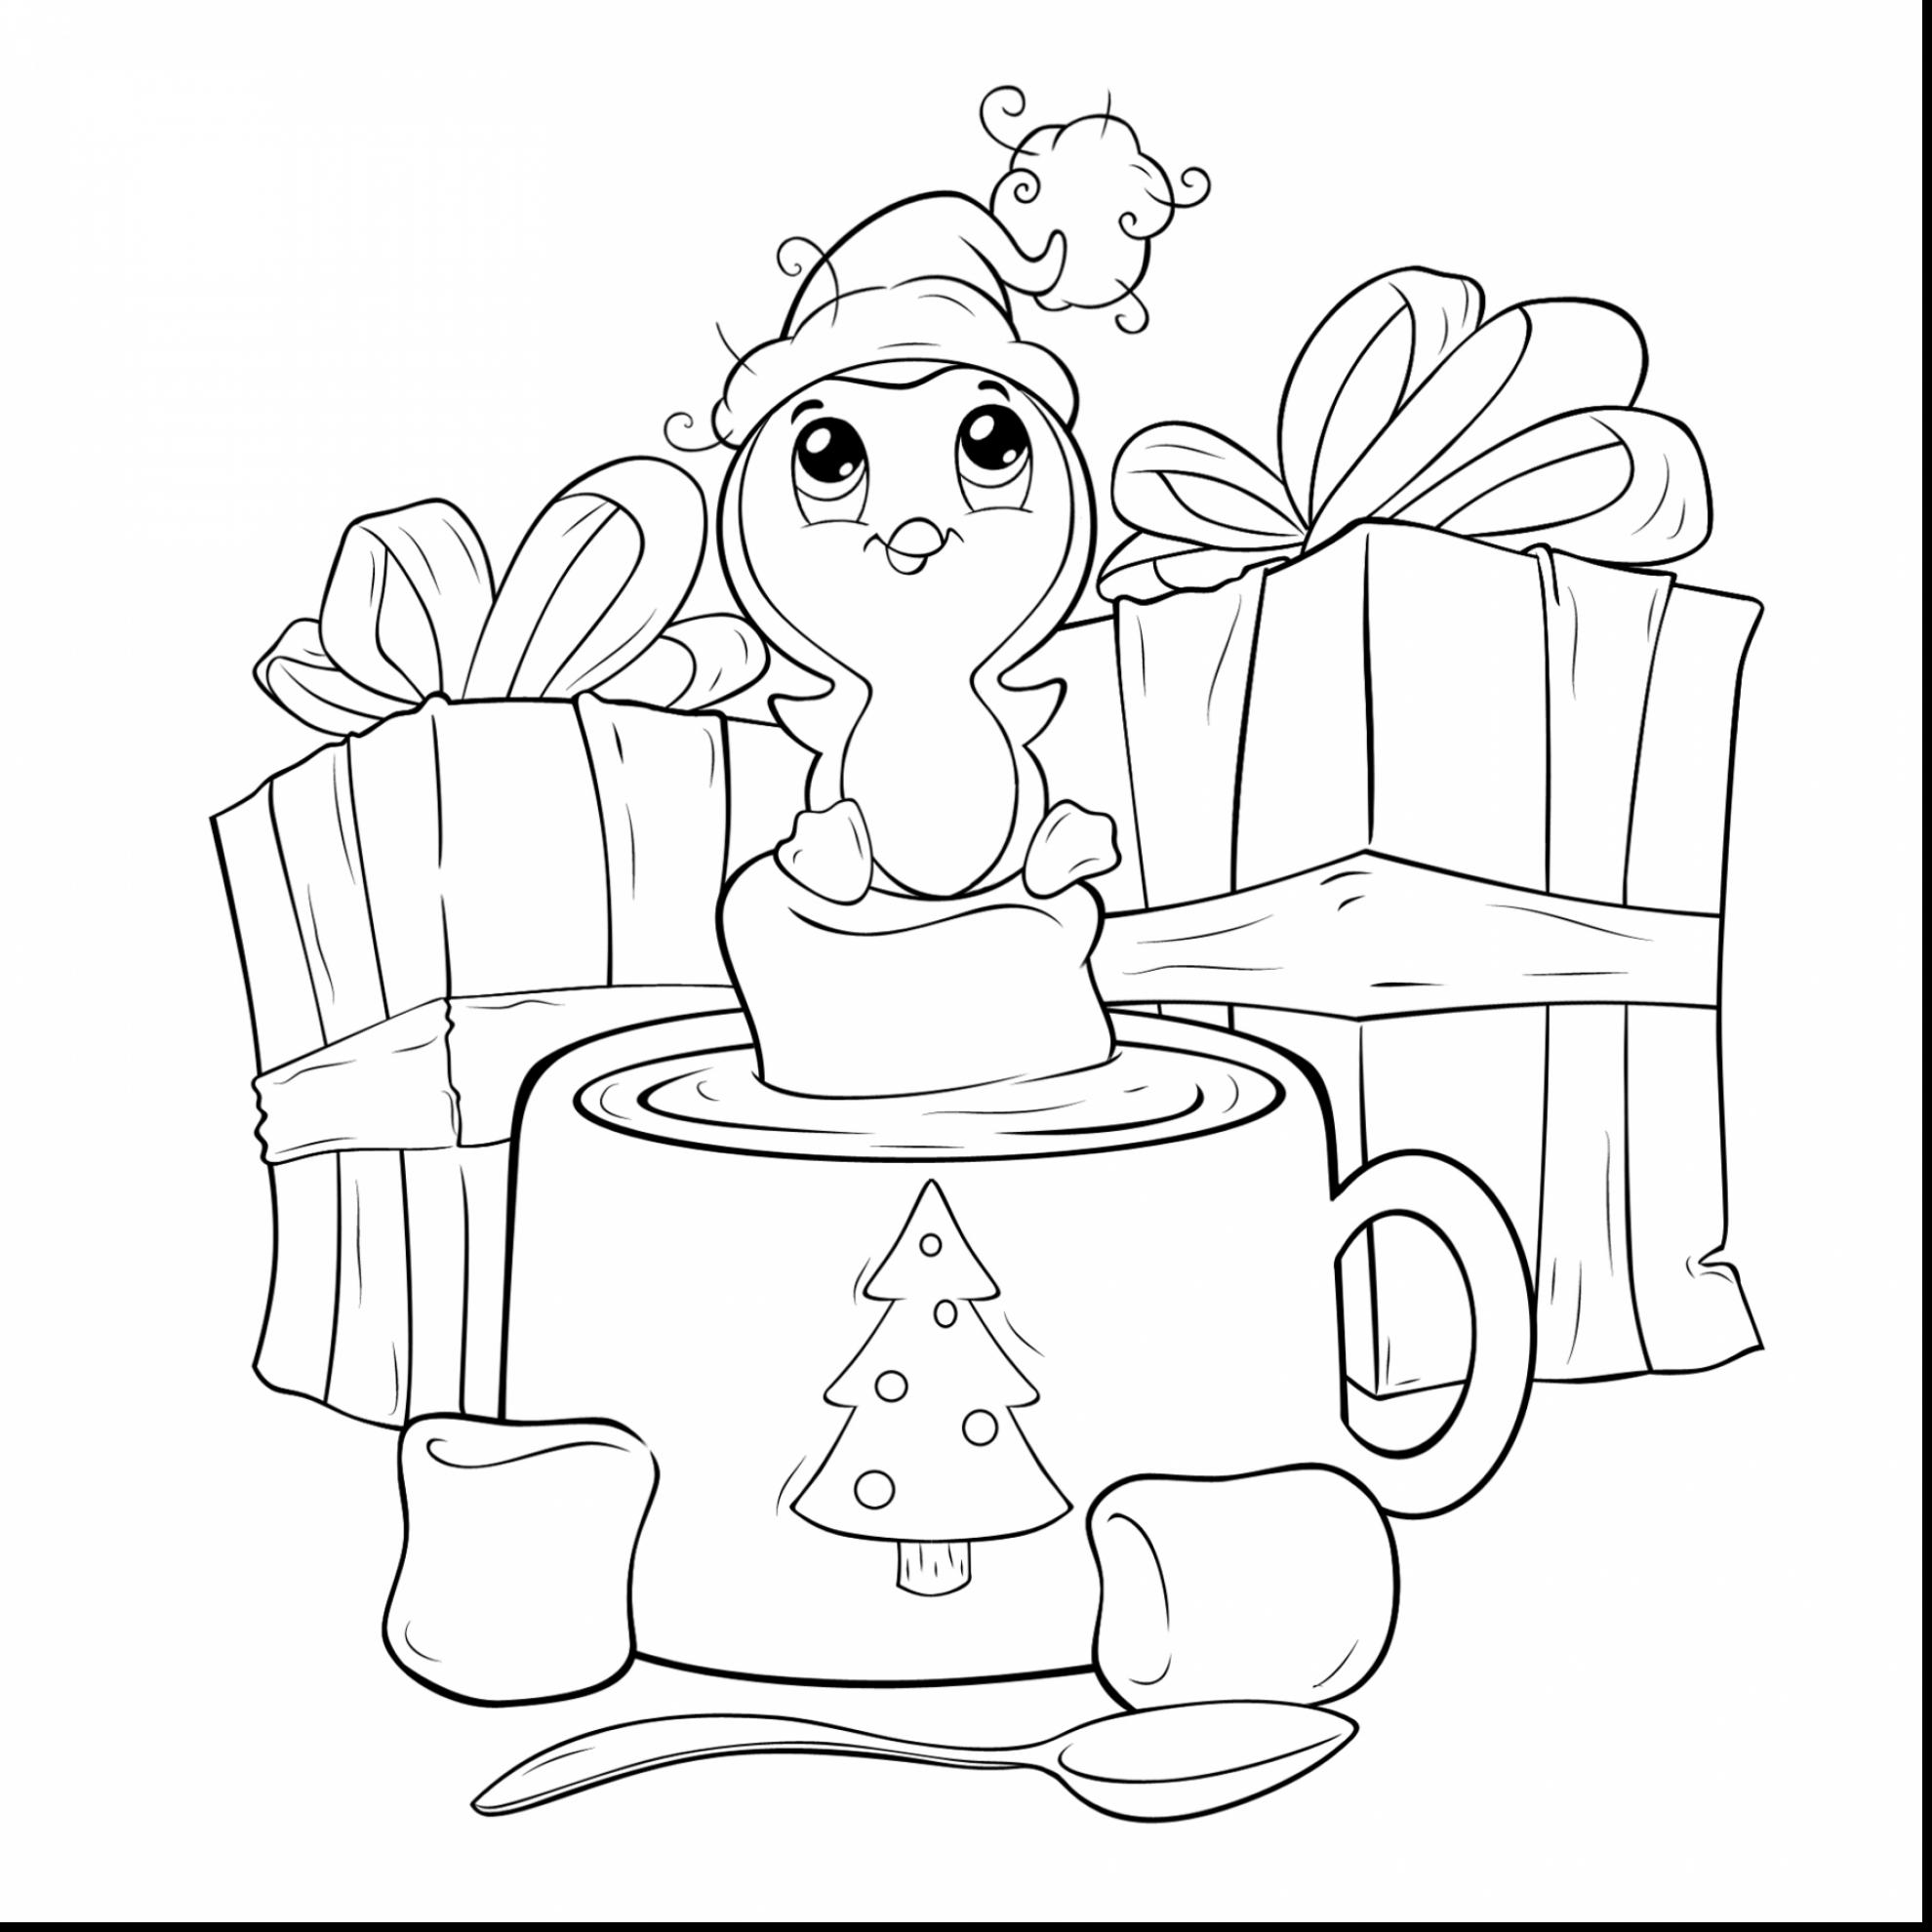 Hot Chocolate Coloring Page at GetColorings.com | Free printable